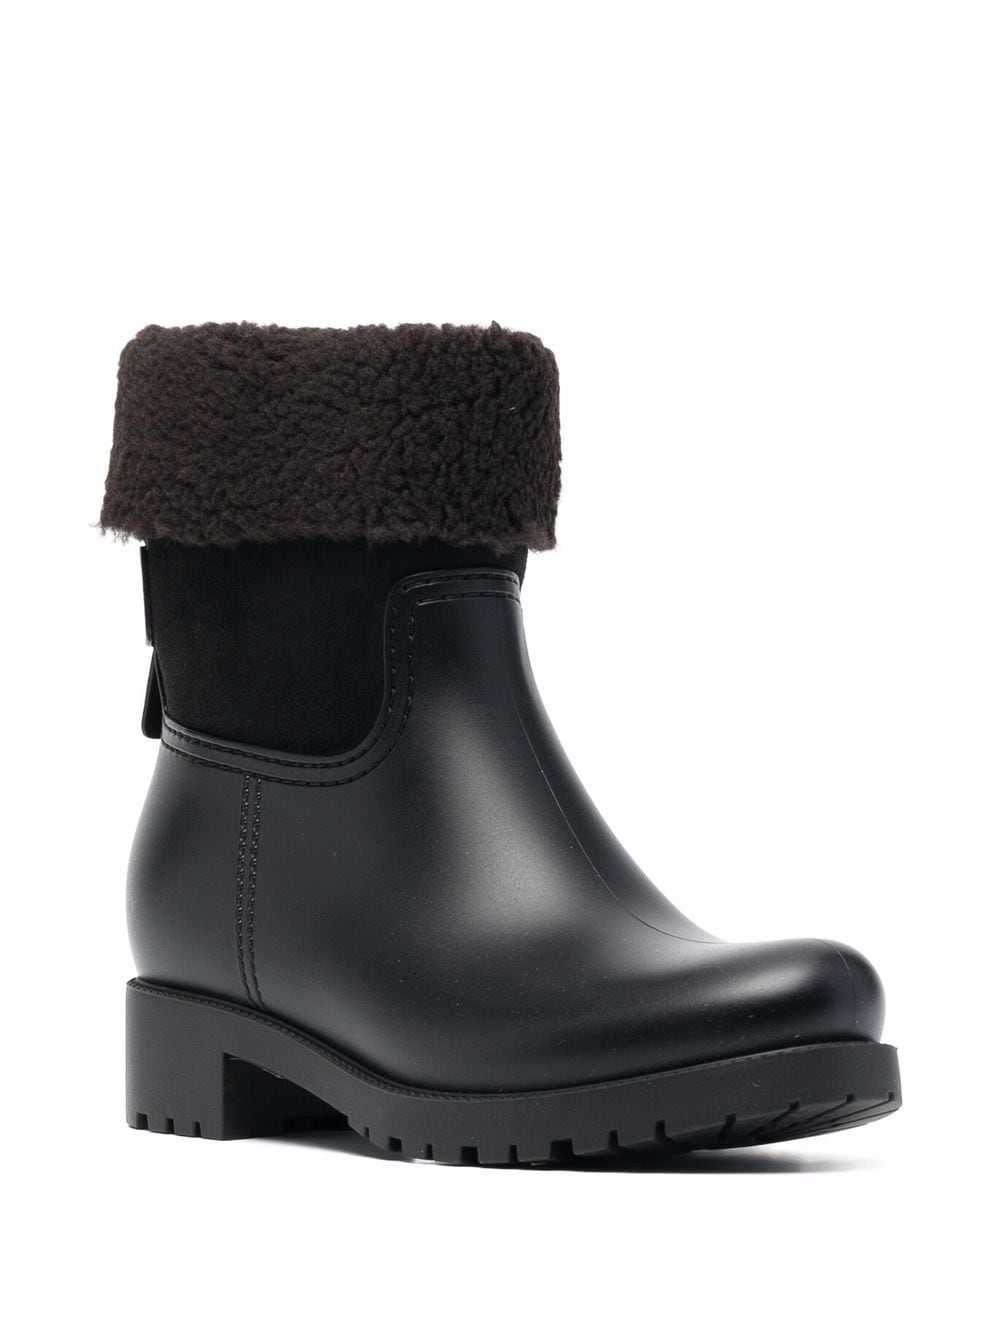 See By Chloé Shearling-lined Leather Ankle Boots In Schwarz | ModeSens